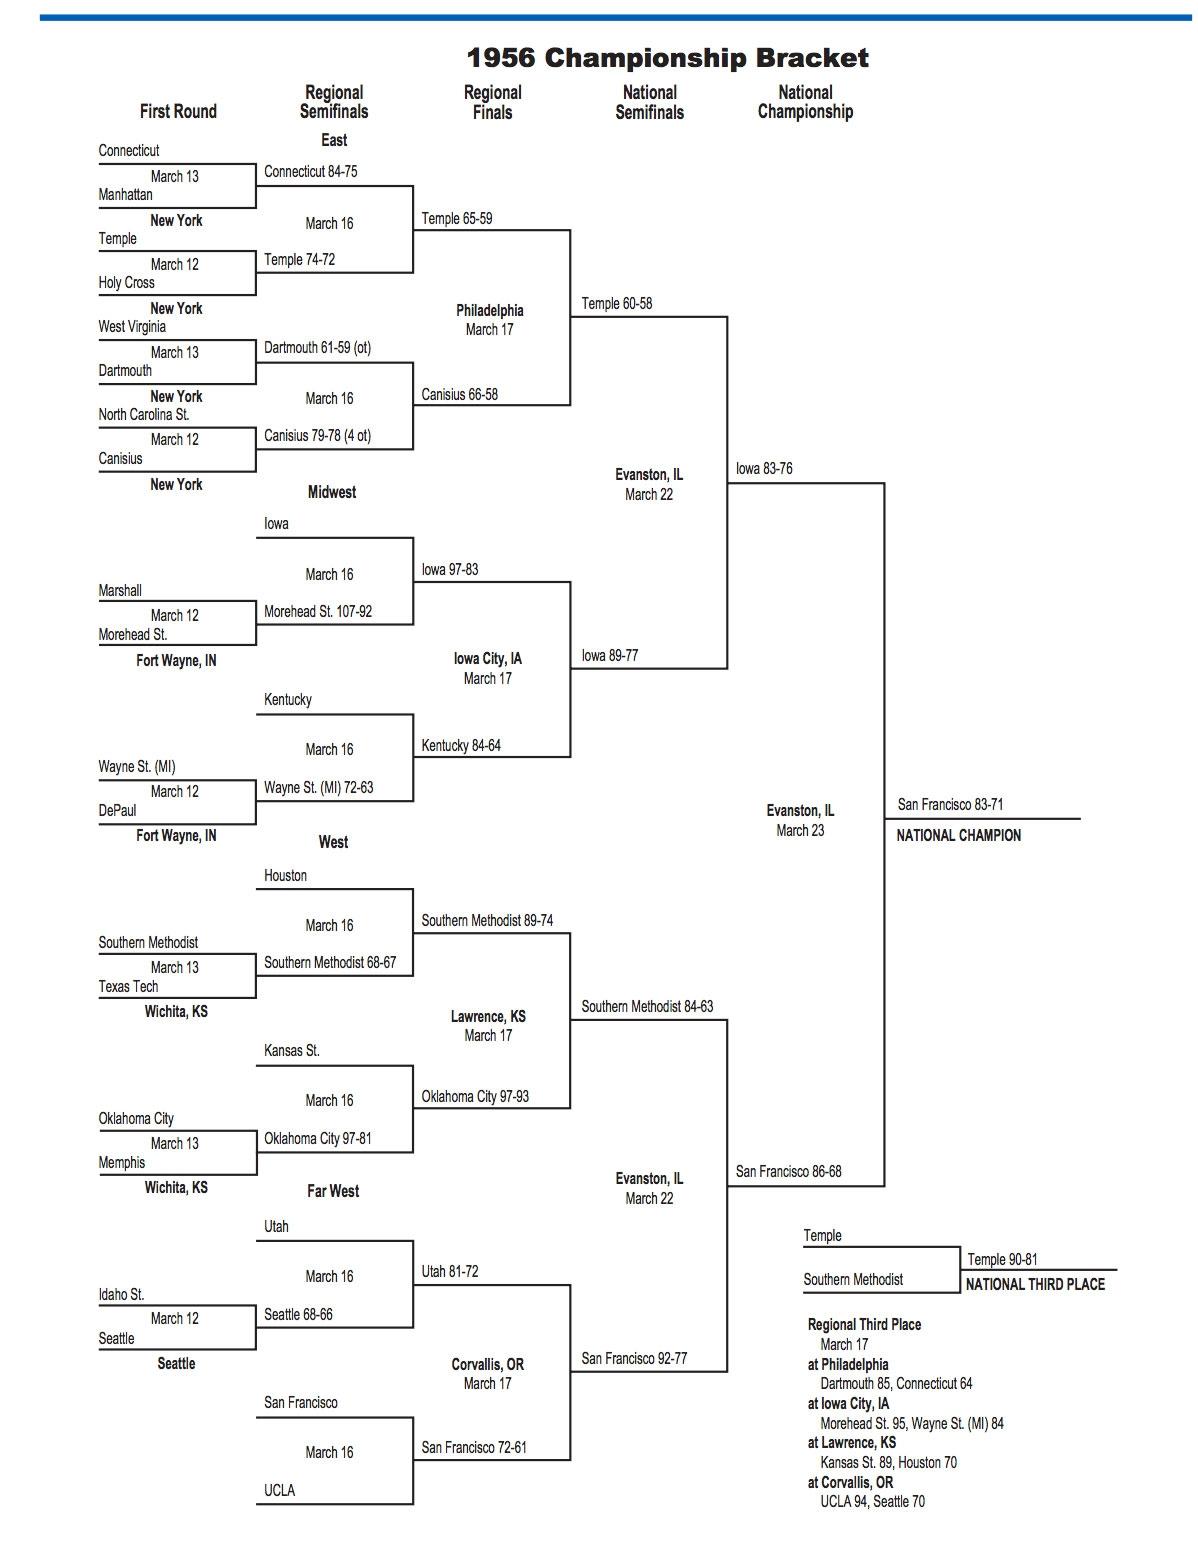 This is the 1956 NCAA tournament bracket